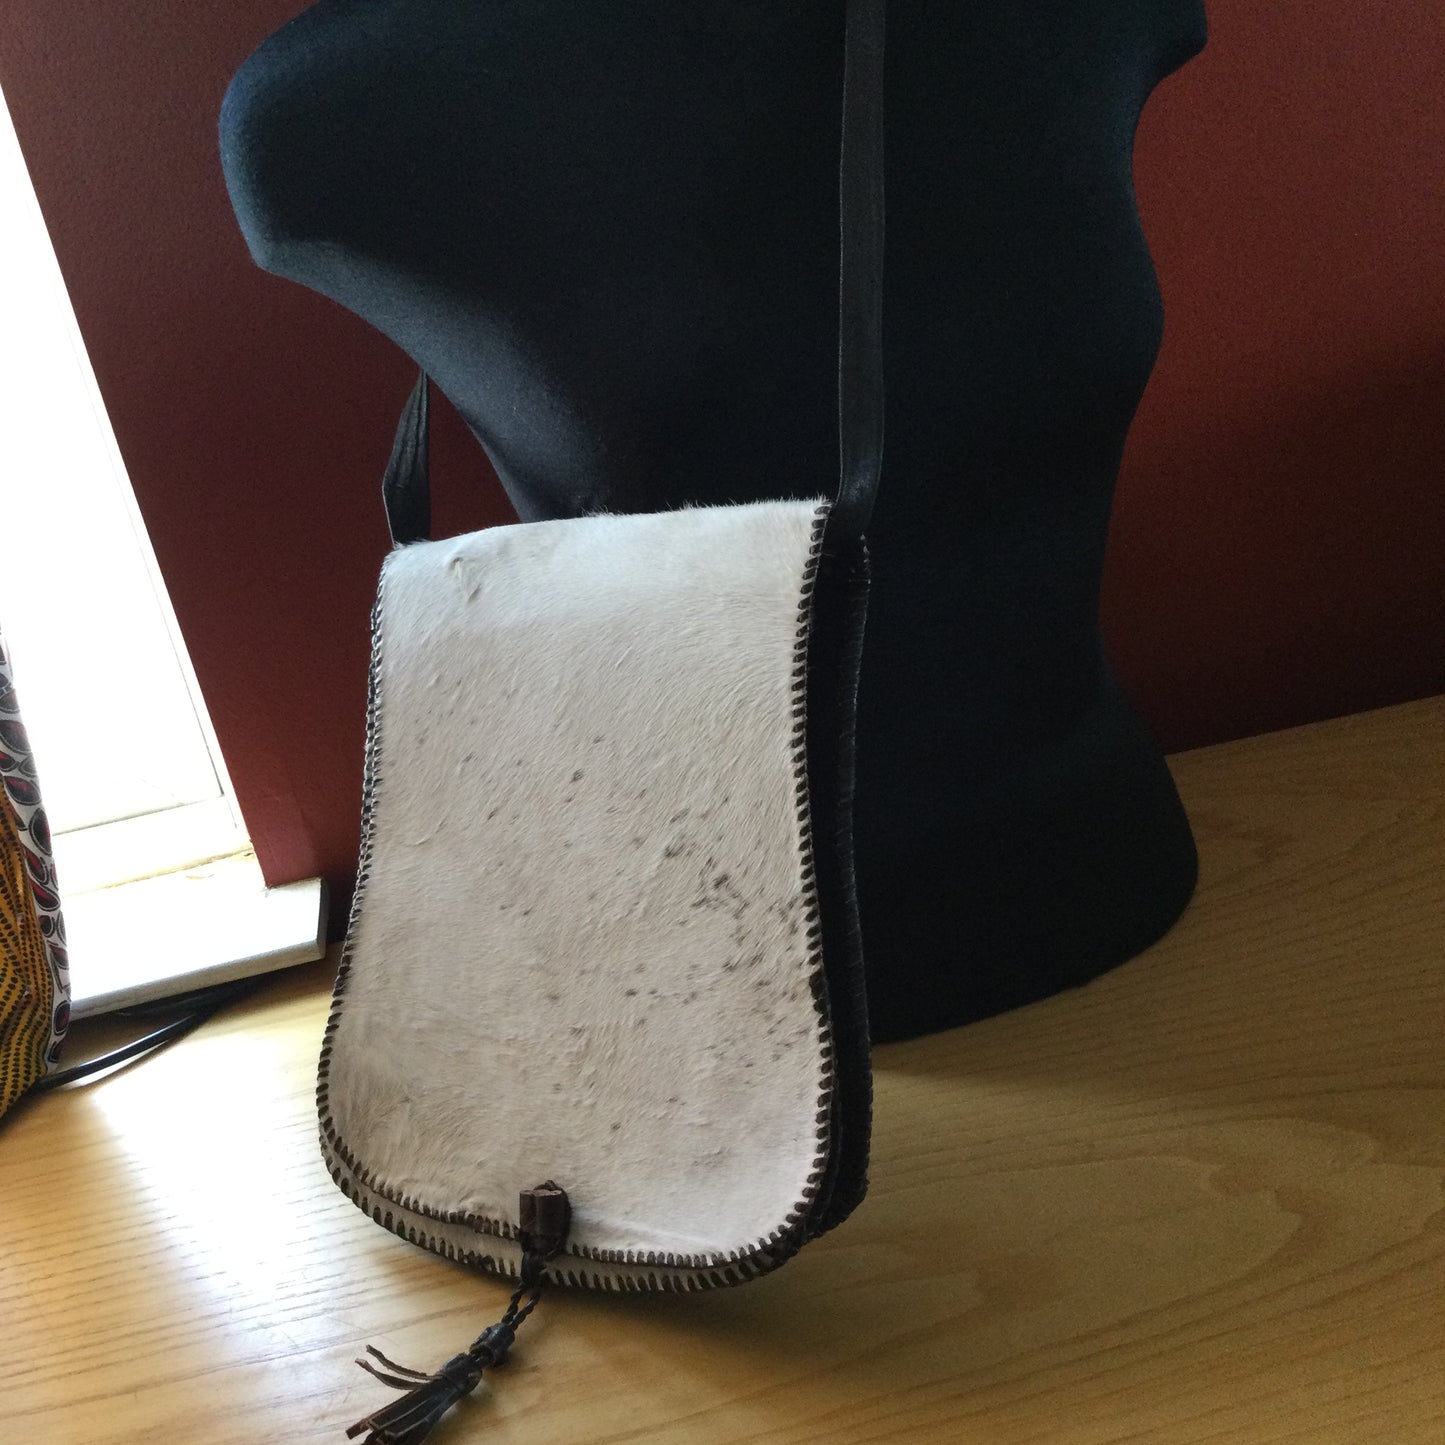 Aiko.Cowhide leather cross body bag Style #2